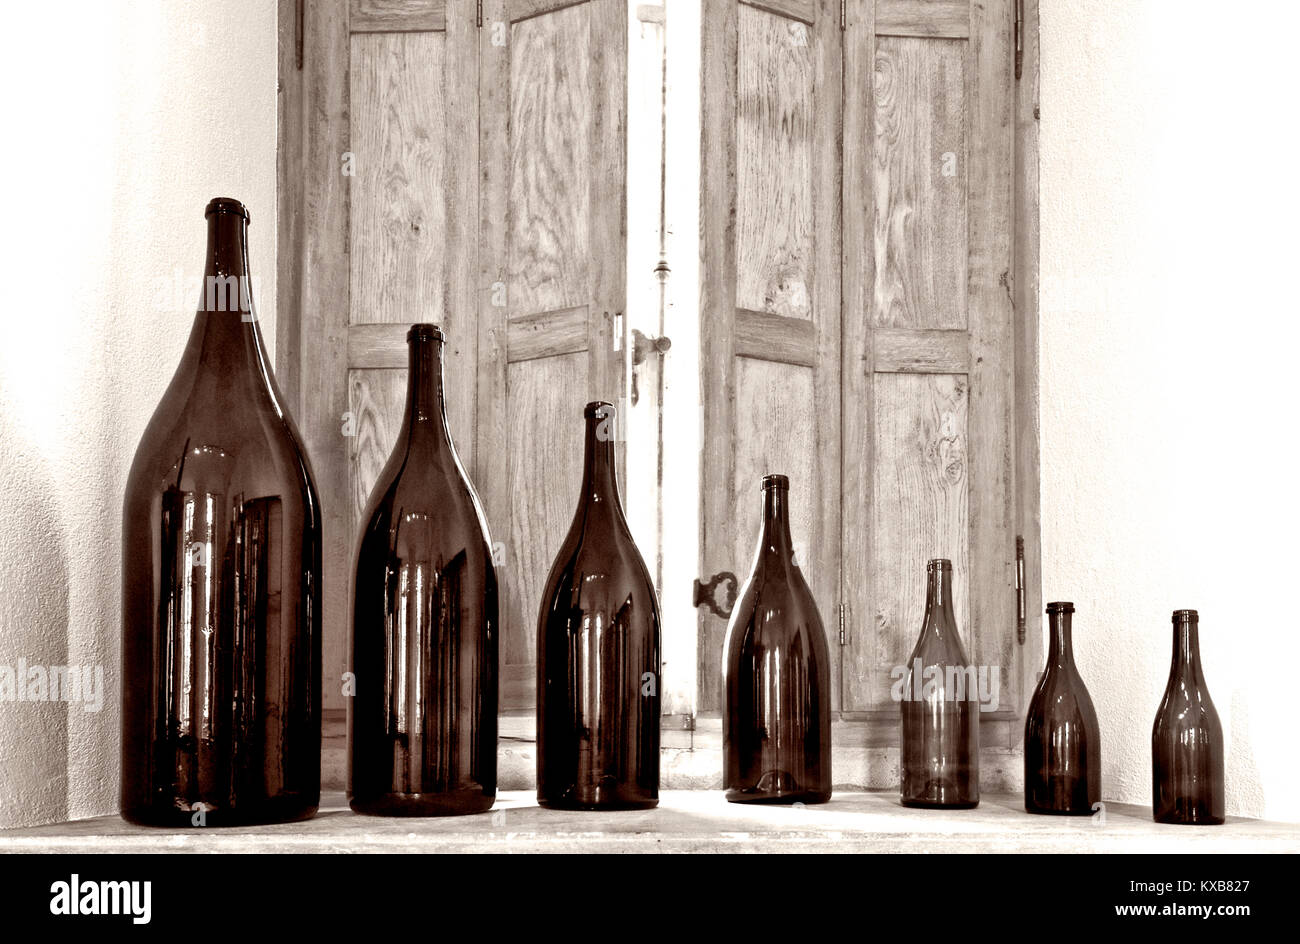 Selection of bottle sizes from Nebuchadnezzar to Split on display in the tasting room of Chateau de Pommard Cote d'Or Burgundy France Stock Photo